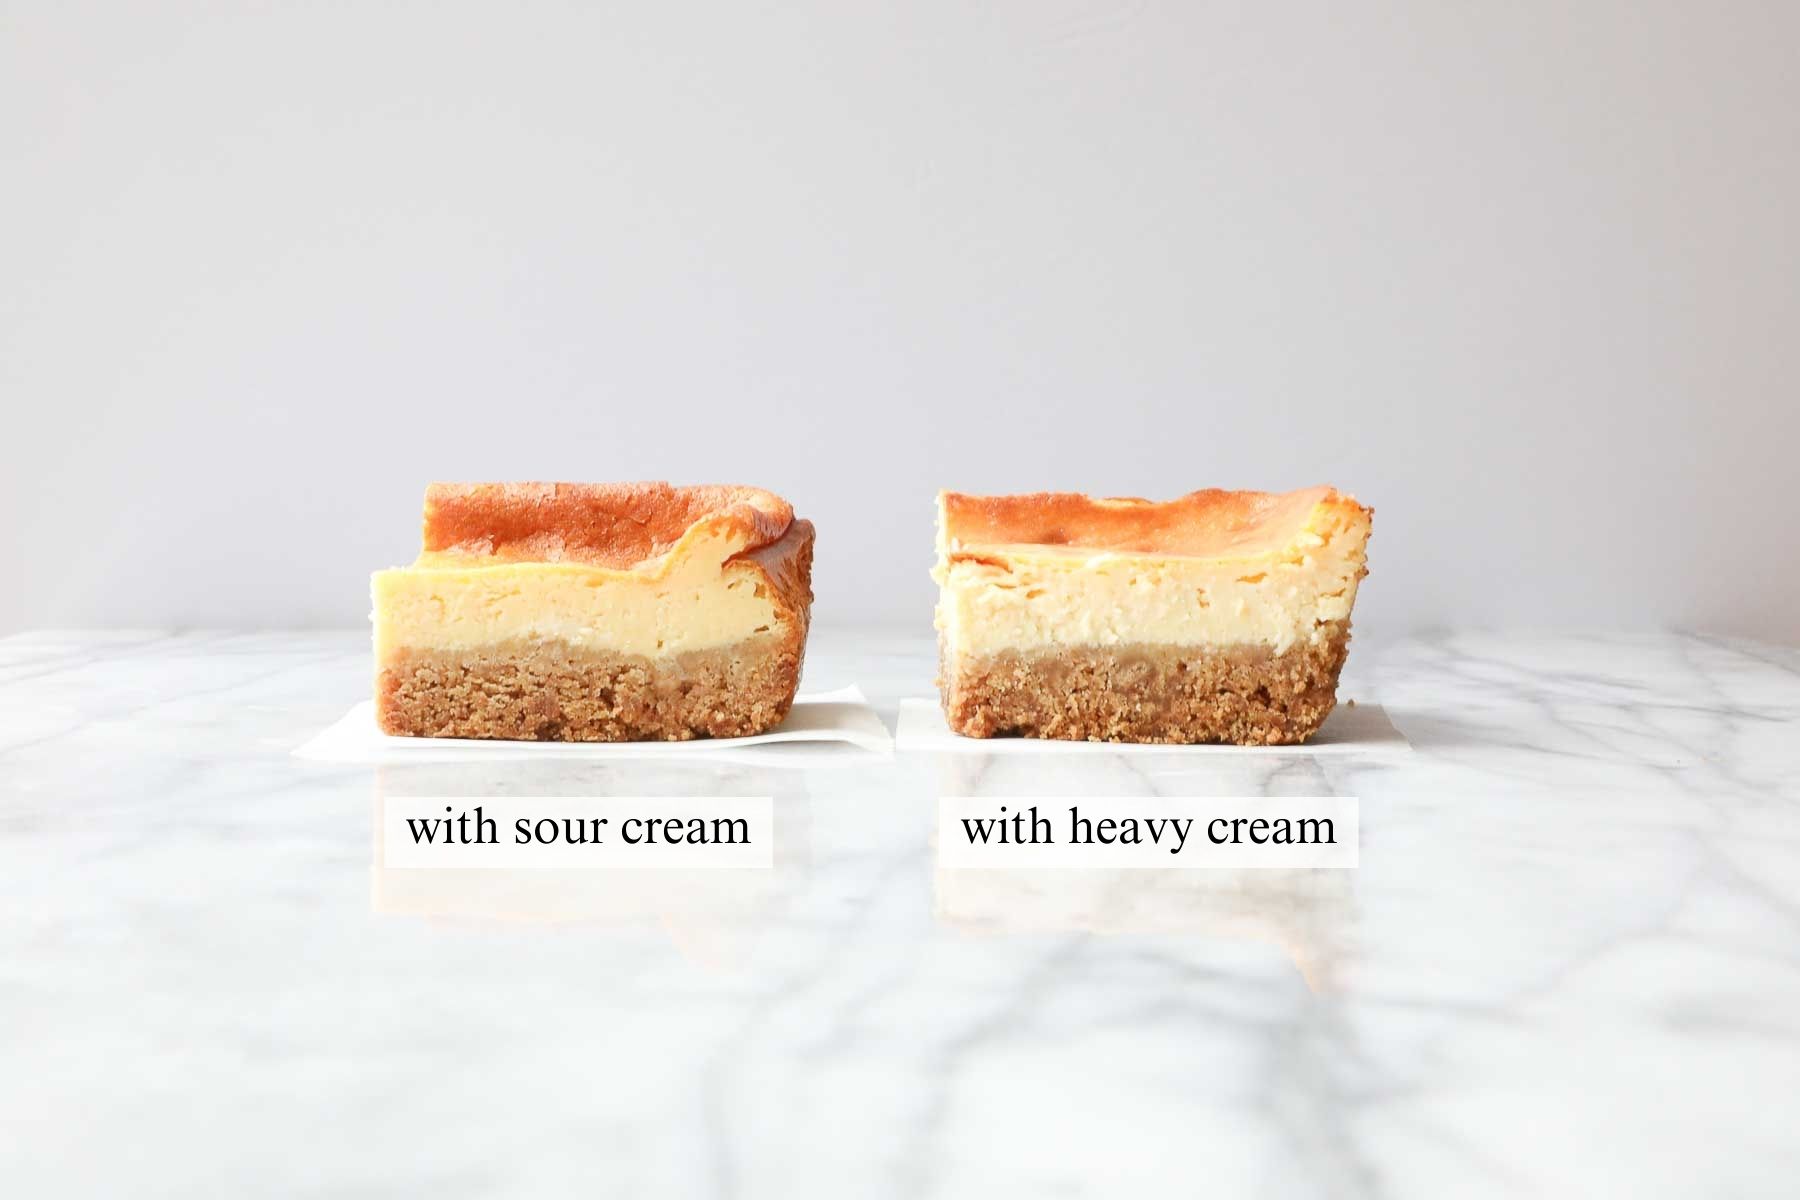 A square of cheesecake made with sour cream compared with a square made with heavy cream.